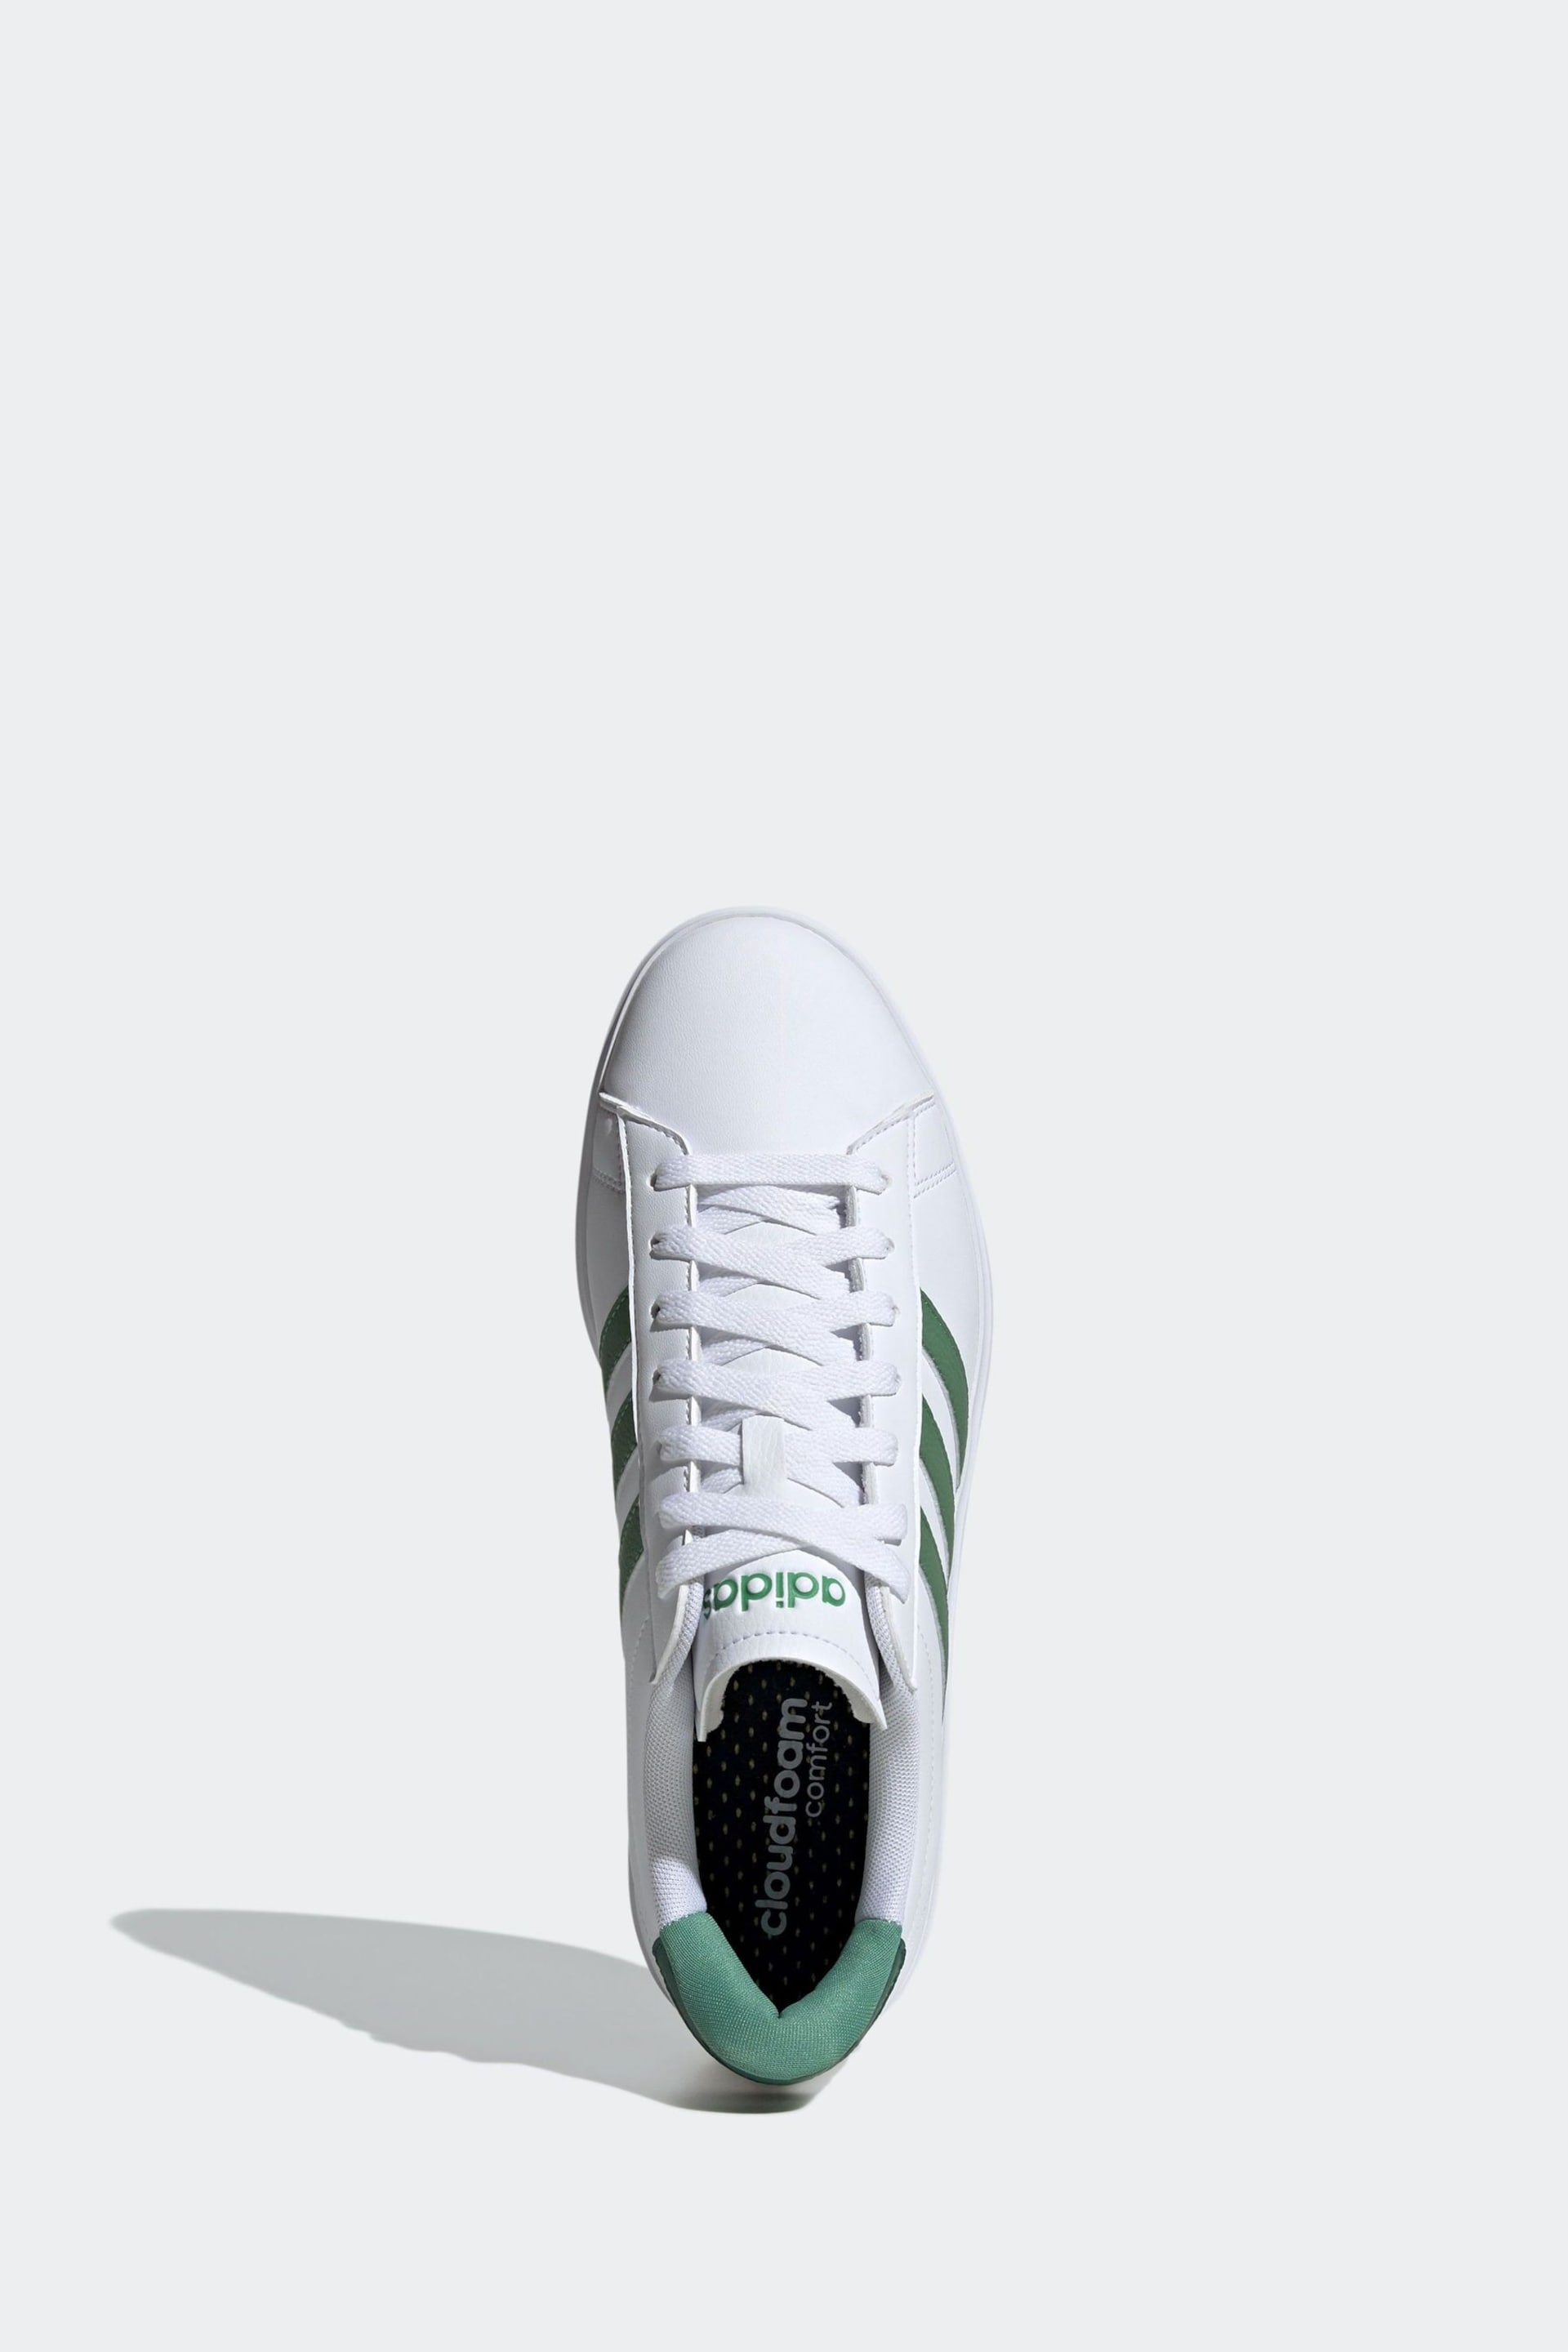 adidas Green White Sportswear Grand Court 2.0 Trainers - Image 4 of 7